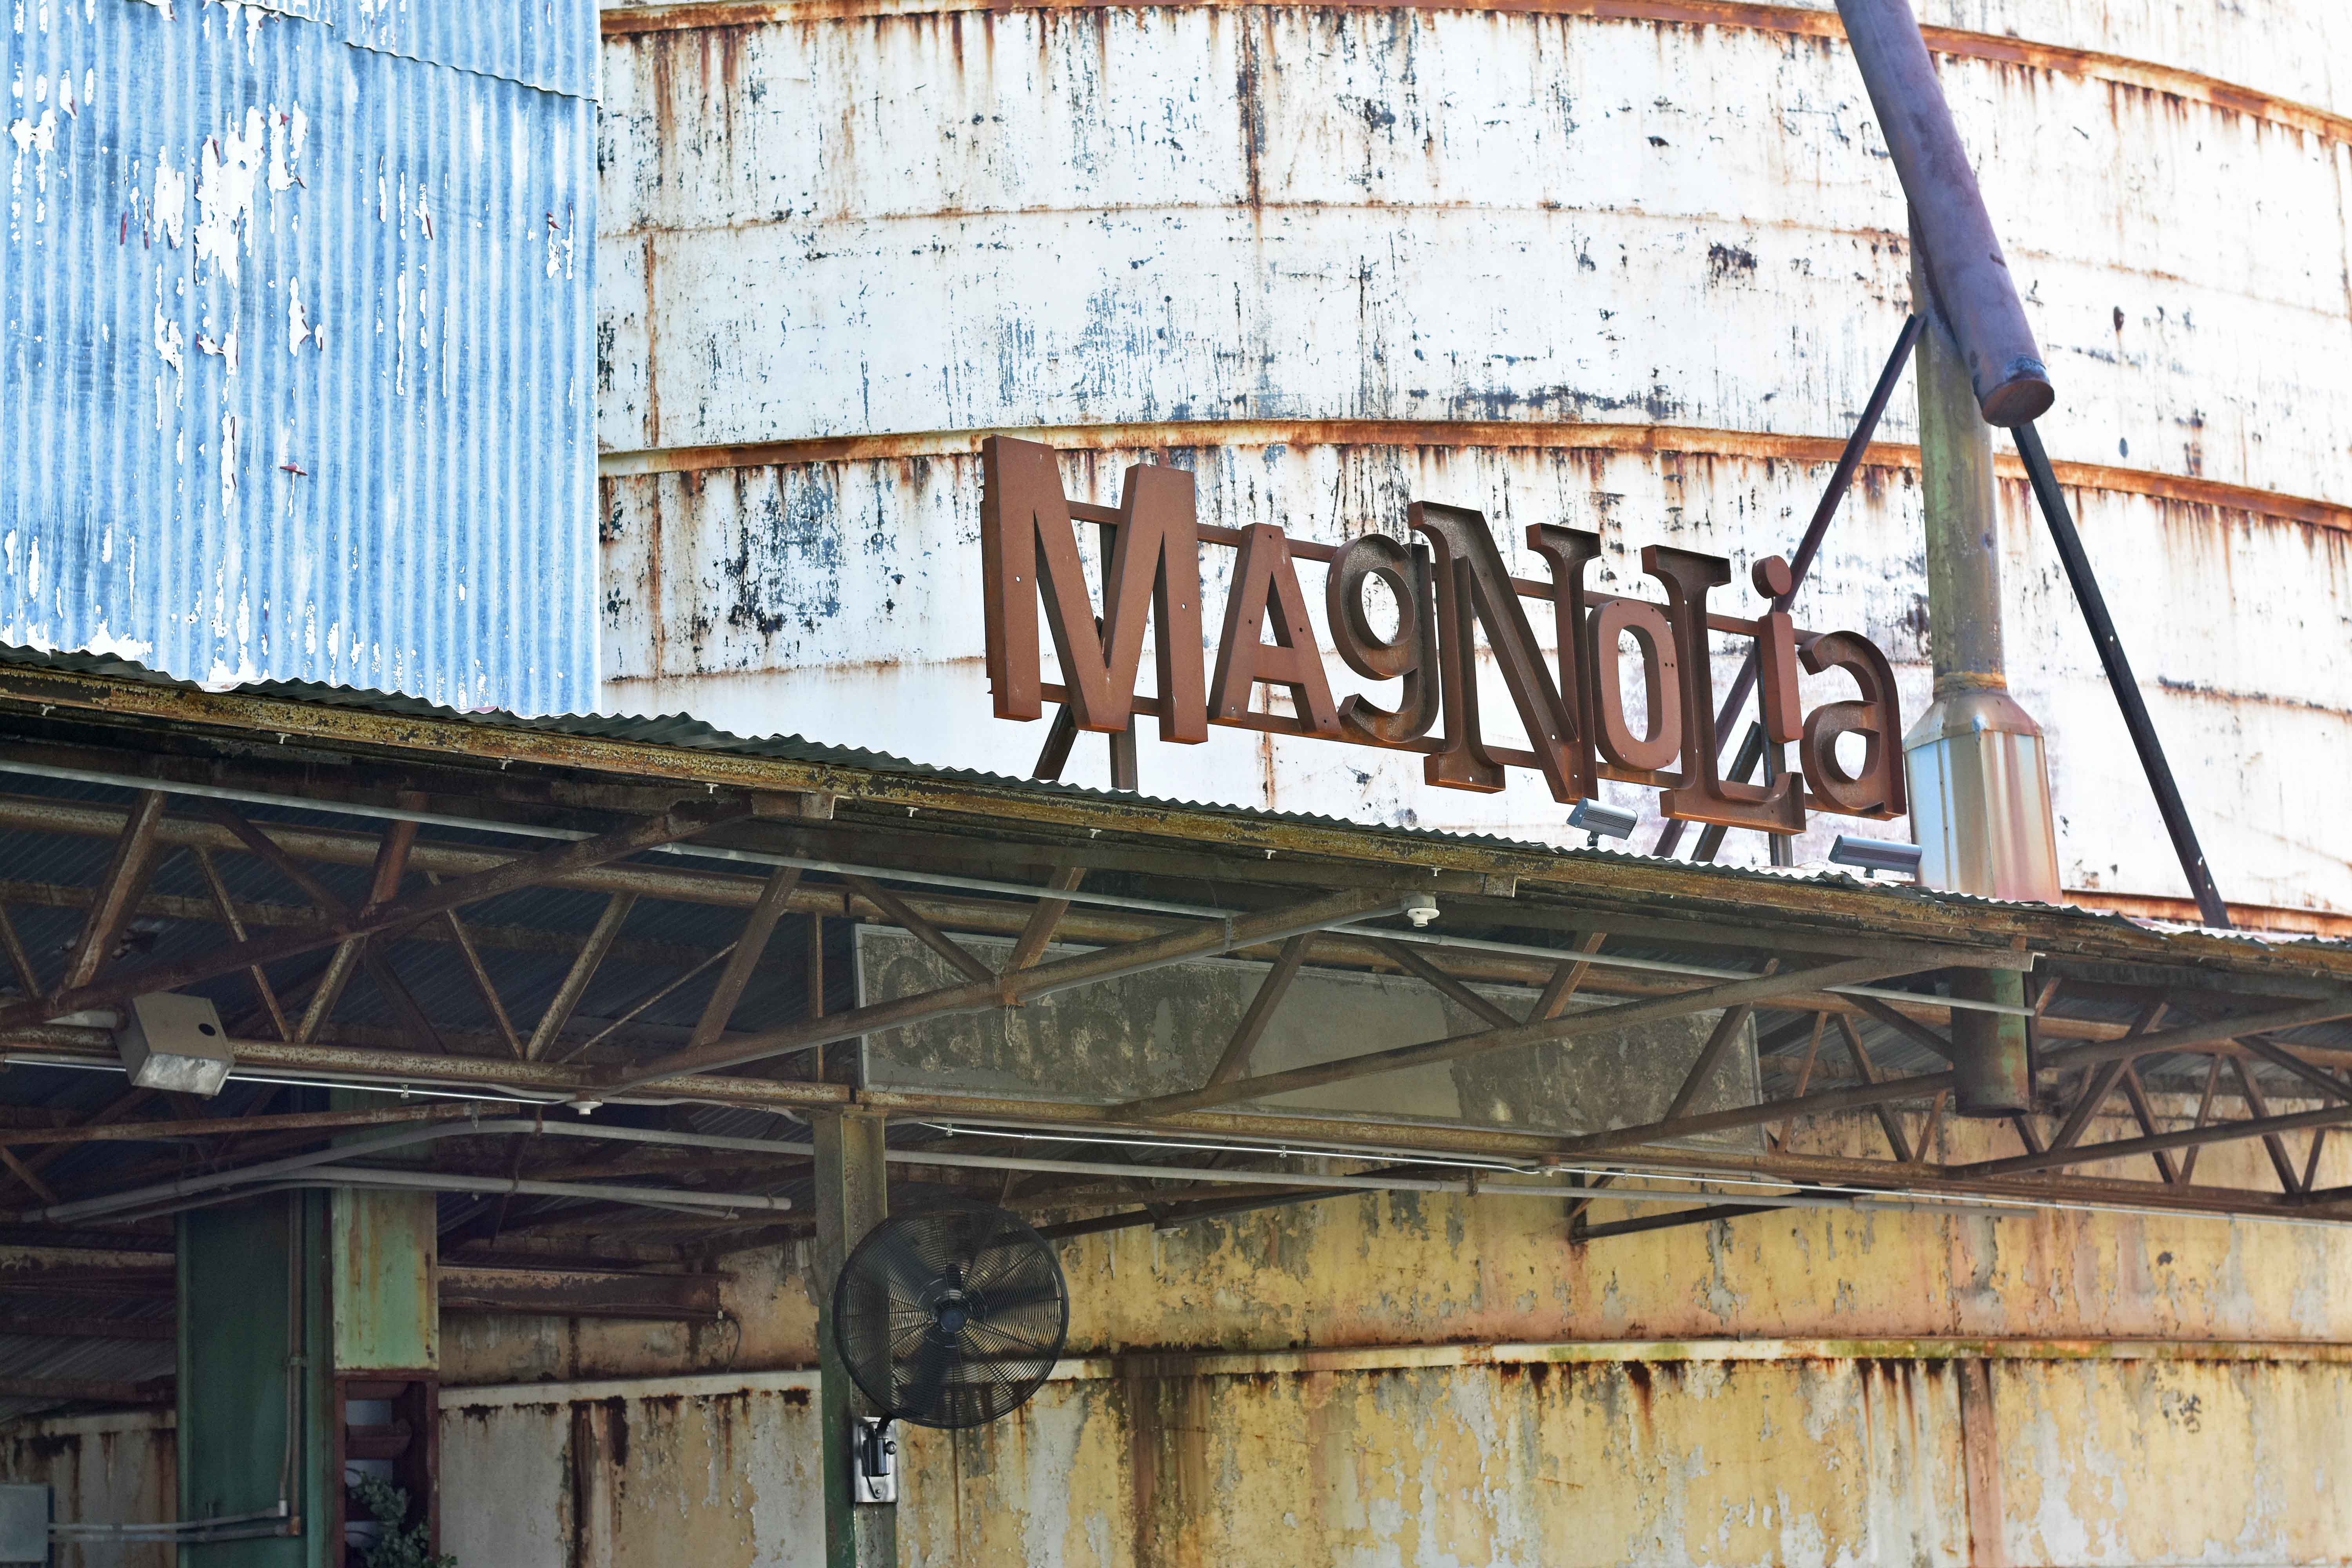 How to plan the perfect trip to Magnolia Market at the Silos in Waco Texas. Magnolia Market was created by HGTV's Fixer Upper favorite couple, Chip and Joanna Gaines. Visit Magnolia Market, Silo Baking Co. and the beautiful grounds. Tips for planning a trip to Magnolia Market. www.modernhoney.com